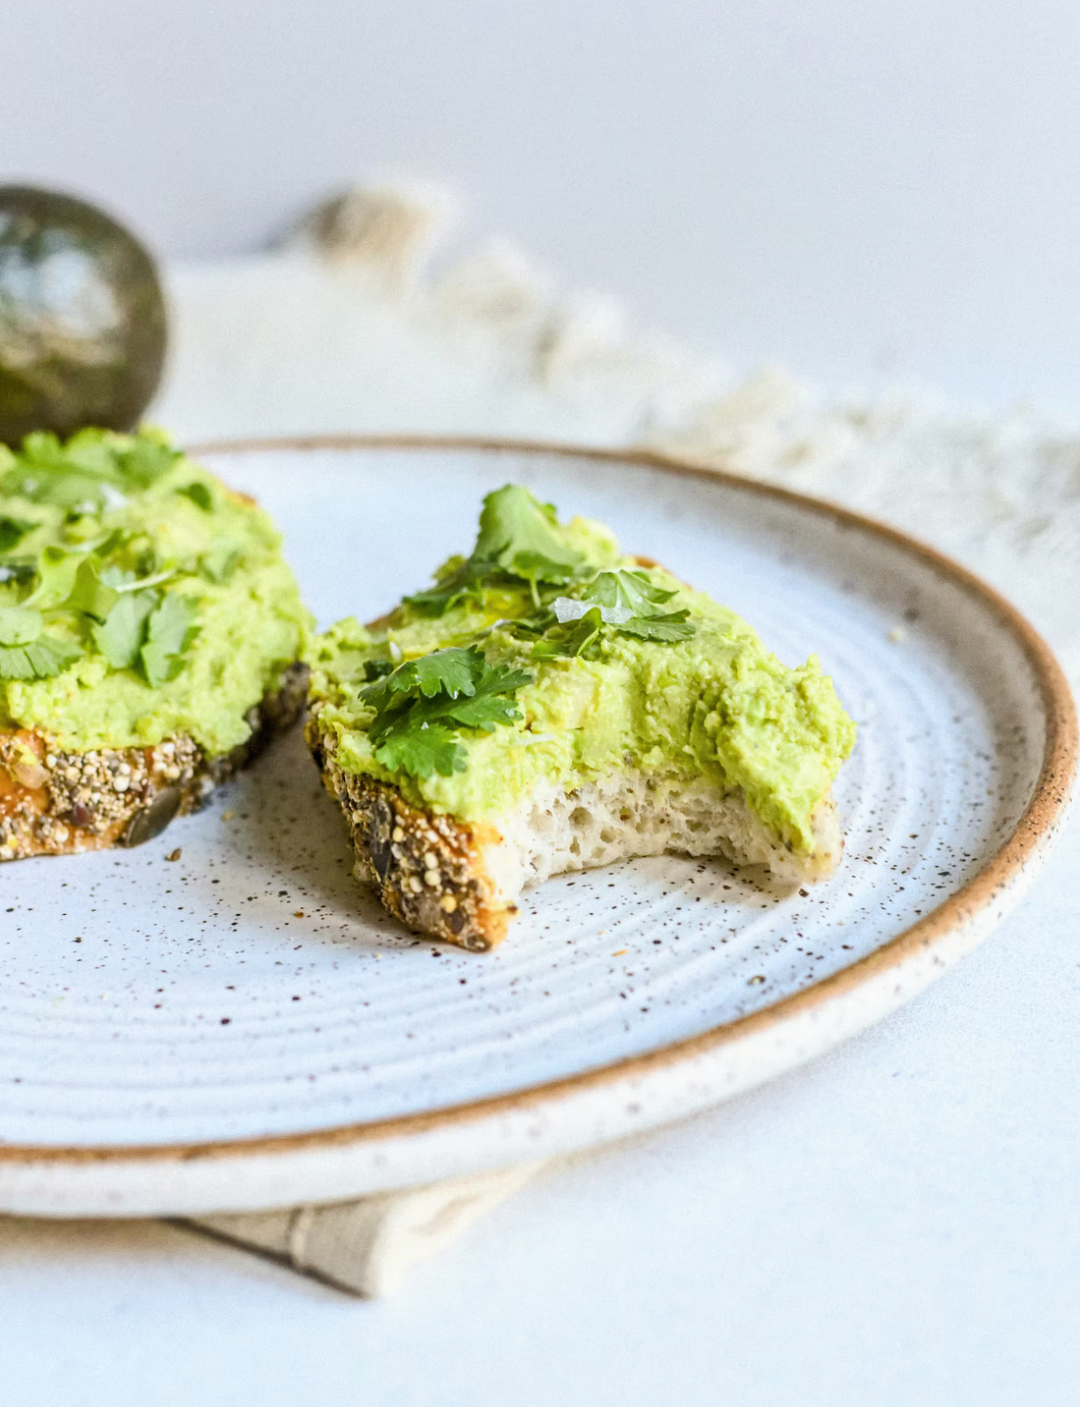 low sodium breakfast recipes with avocado toast no salt added lemon juice chili pepper flakes and garlic toast with french spices